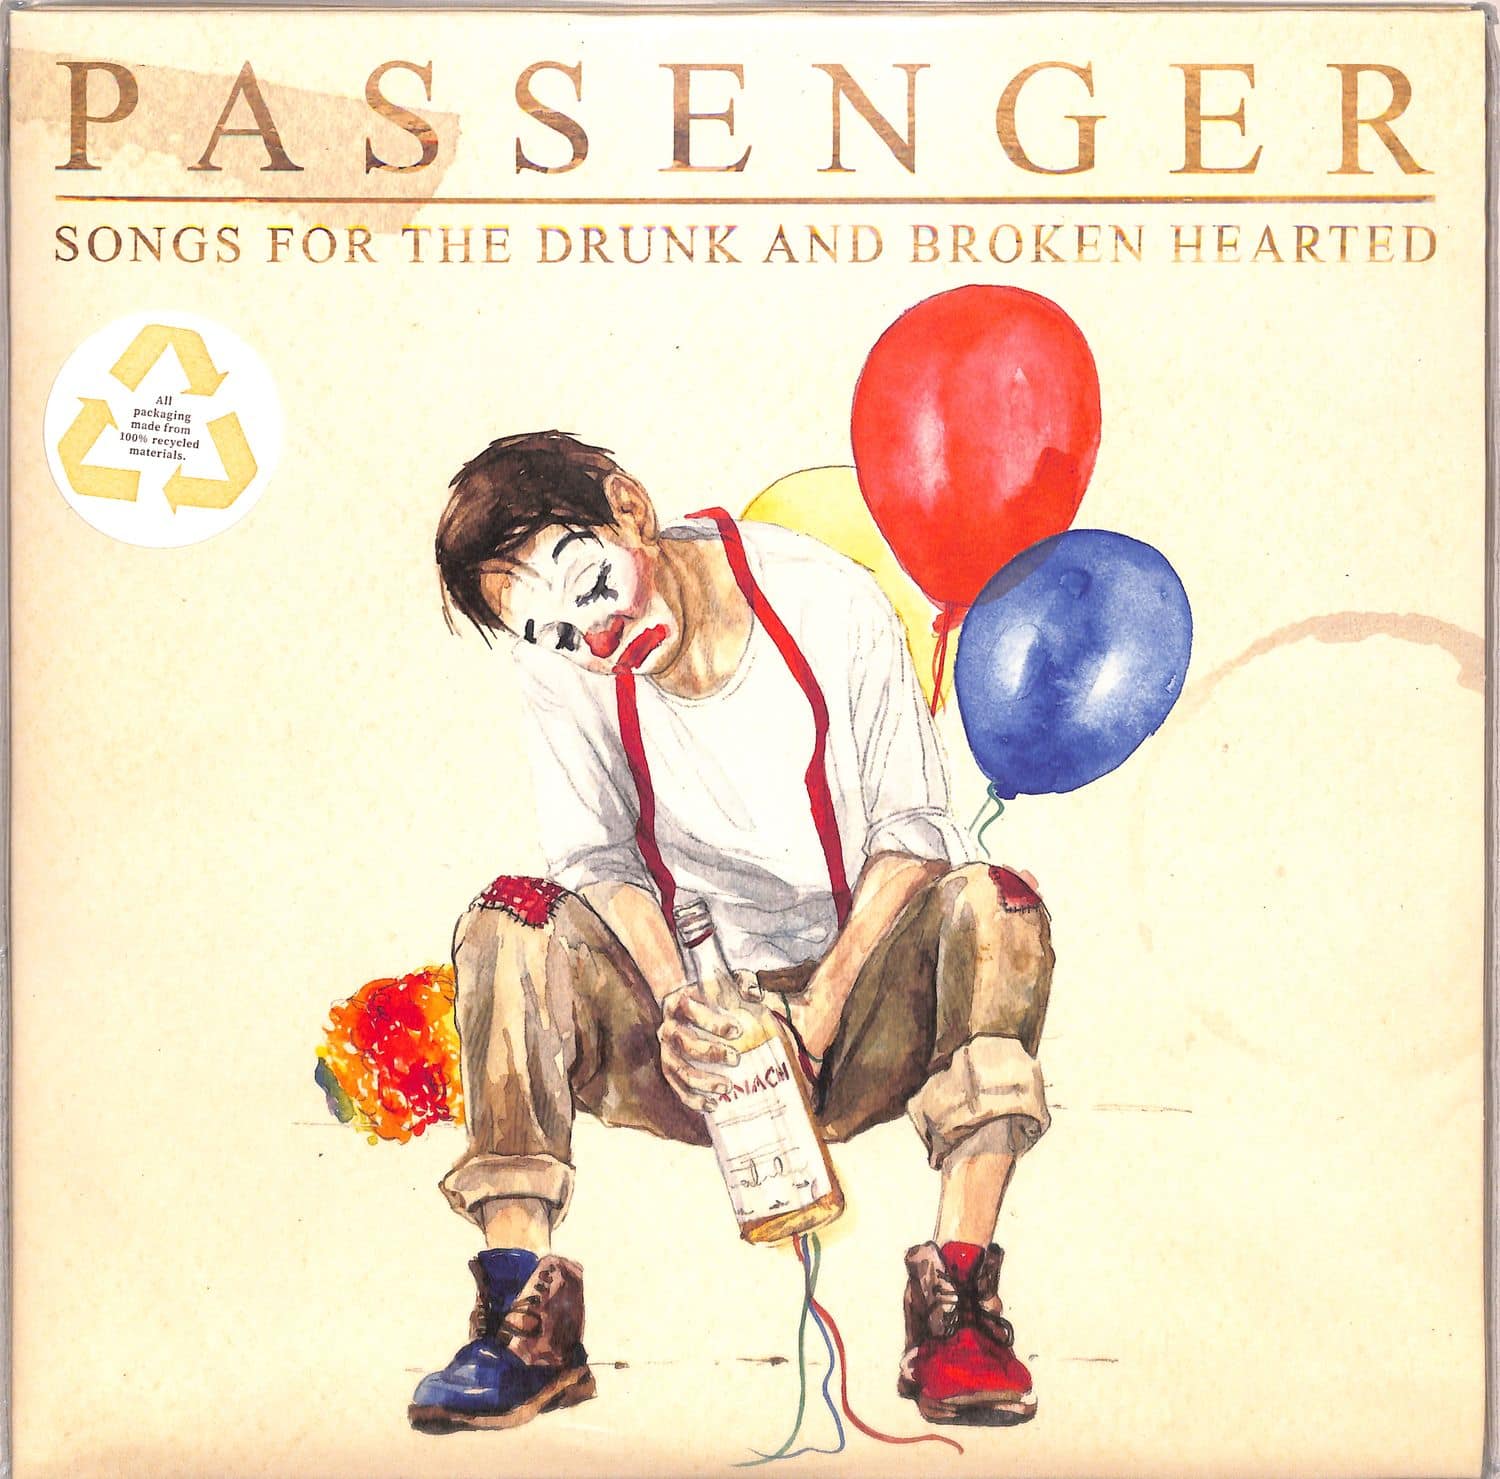 Passenger - SONGS FOR THE DRUNK AND BROKEN HEARTED 